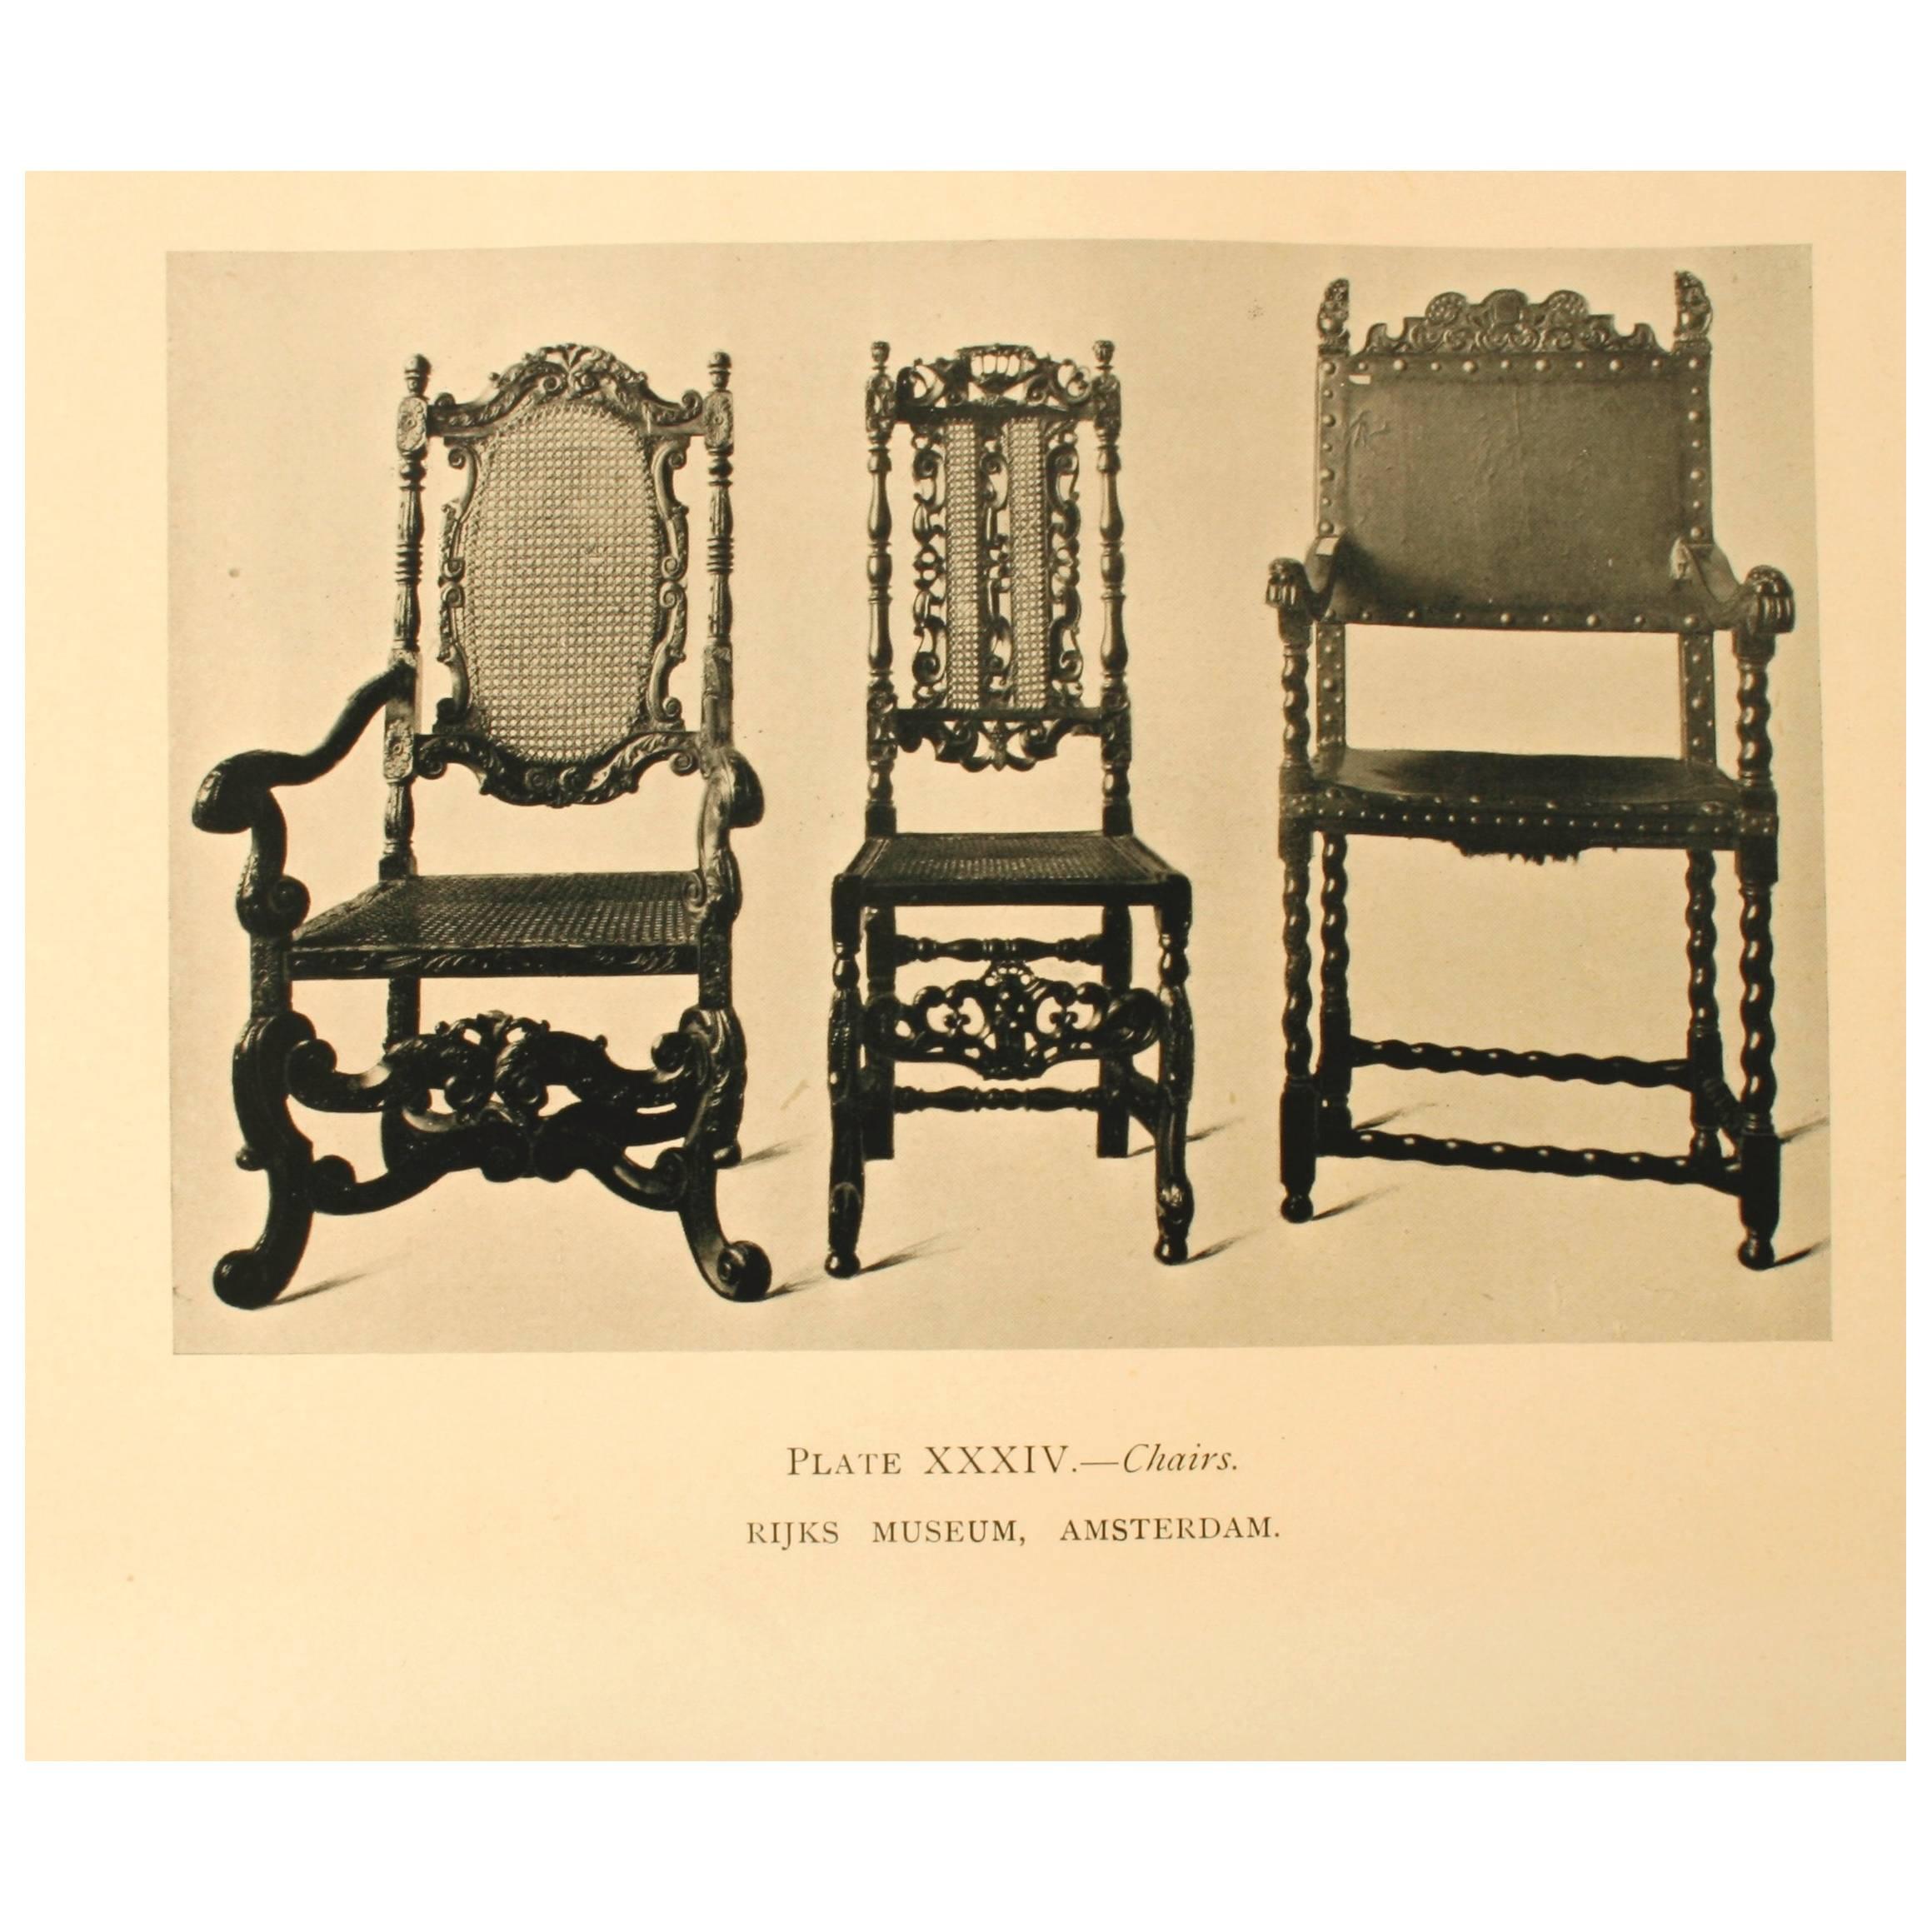 Dutch and Flemish Furniture by Esther Singleton. New York: The McClure Company, 1907. First edition hardcover, 338 pp. A history of the decorative arts in the Dutch and Flemish regions of Europe from the Middle Ages to the 19th century. It tells of